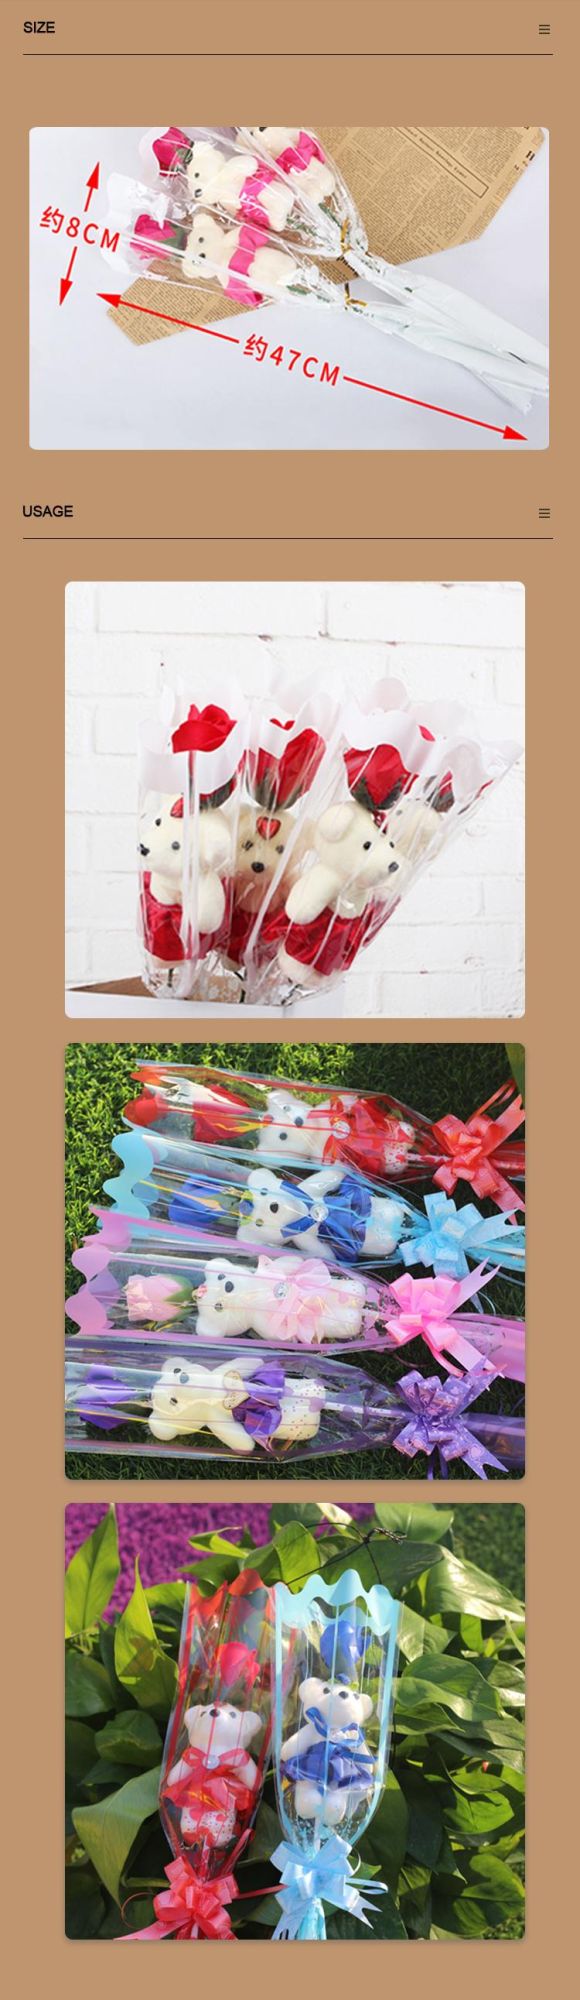 Wholesale Artificial Soap Flower Bouquet for Christmas, Valentine′s Day, Mother′s Day Gifts